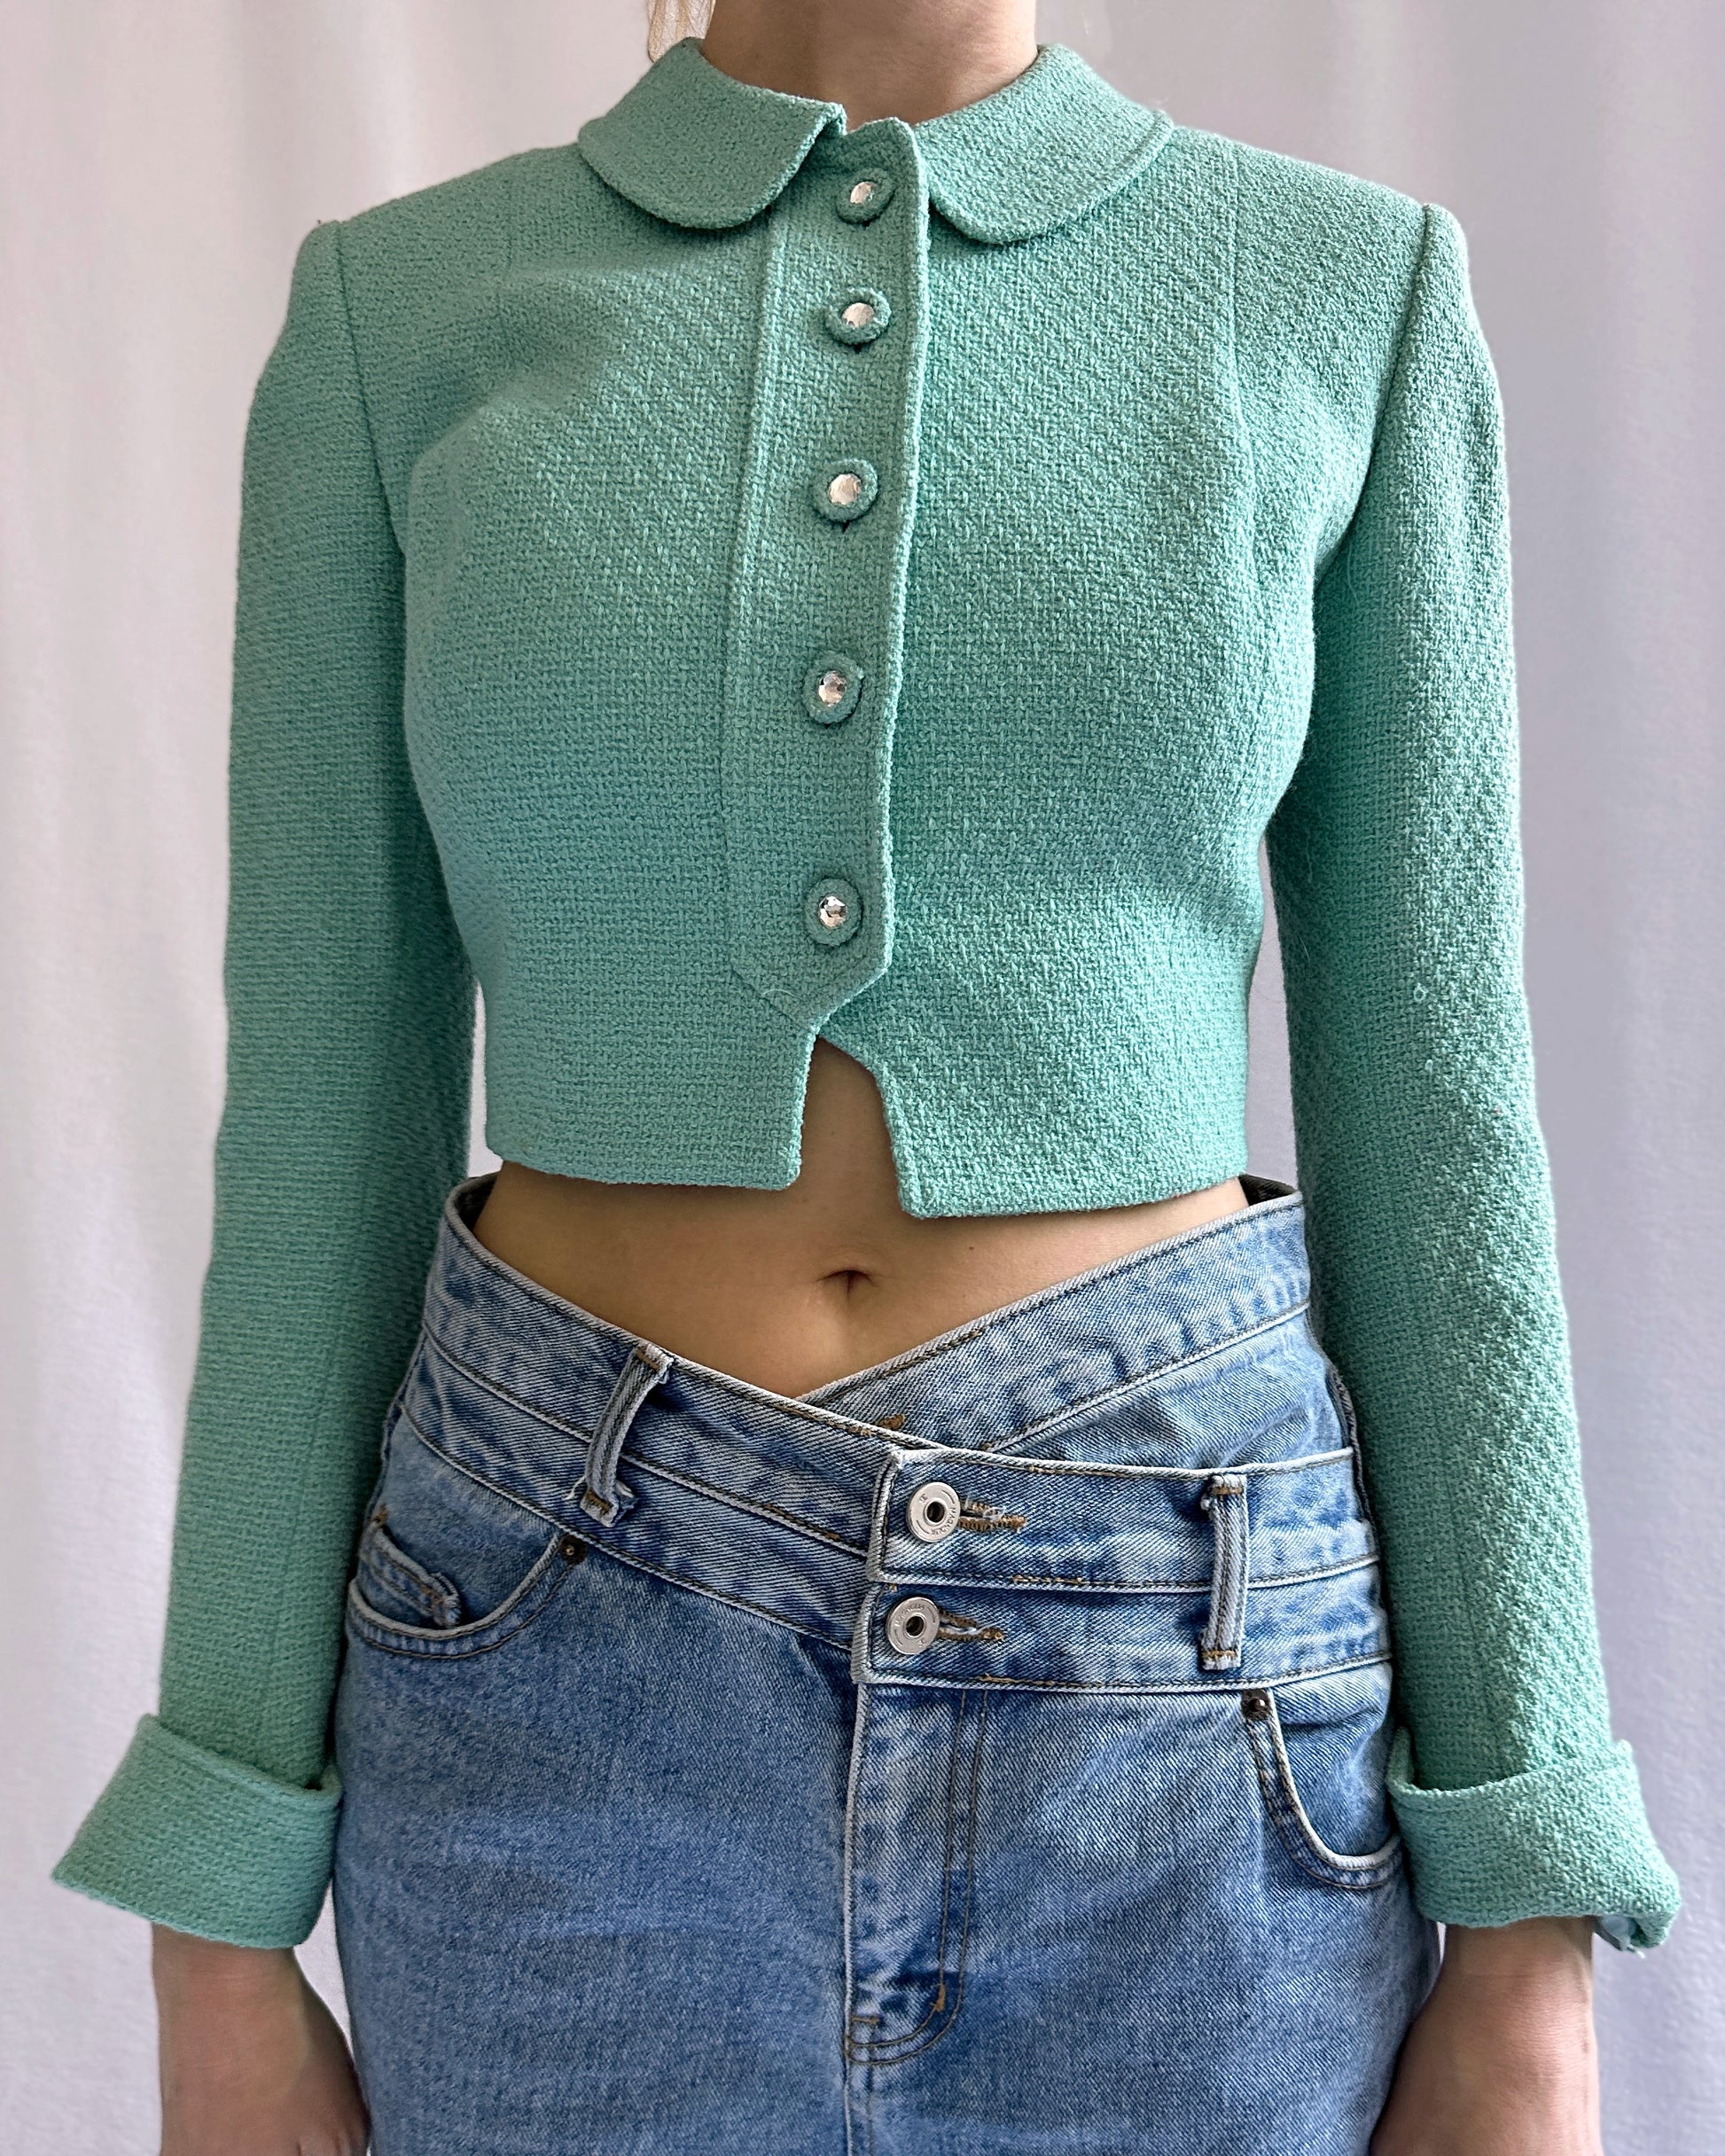 CHANEL, Tops, Authentic Vintage Chanel 998 Cc Logo Green Knit Top Shirt  Sweater